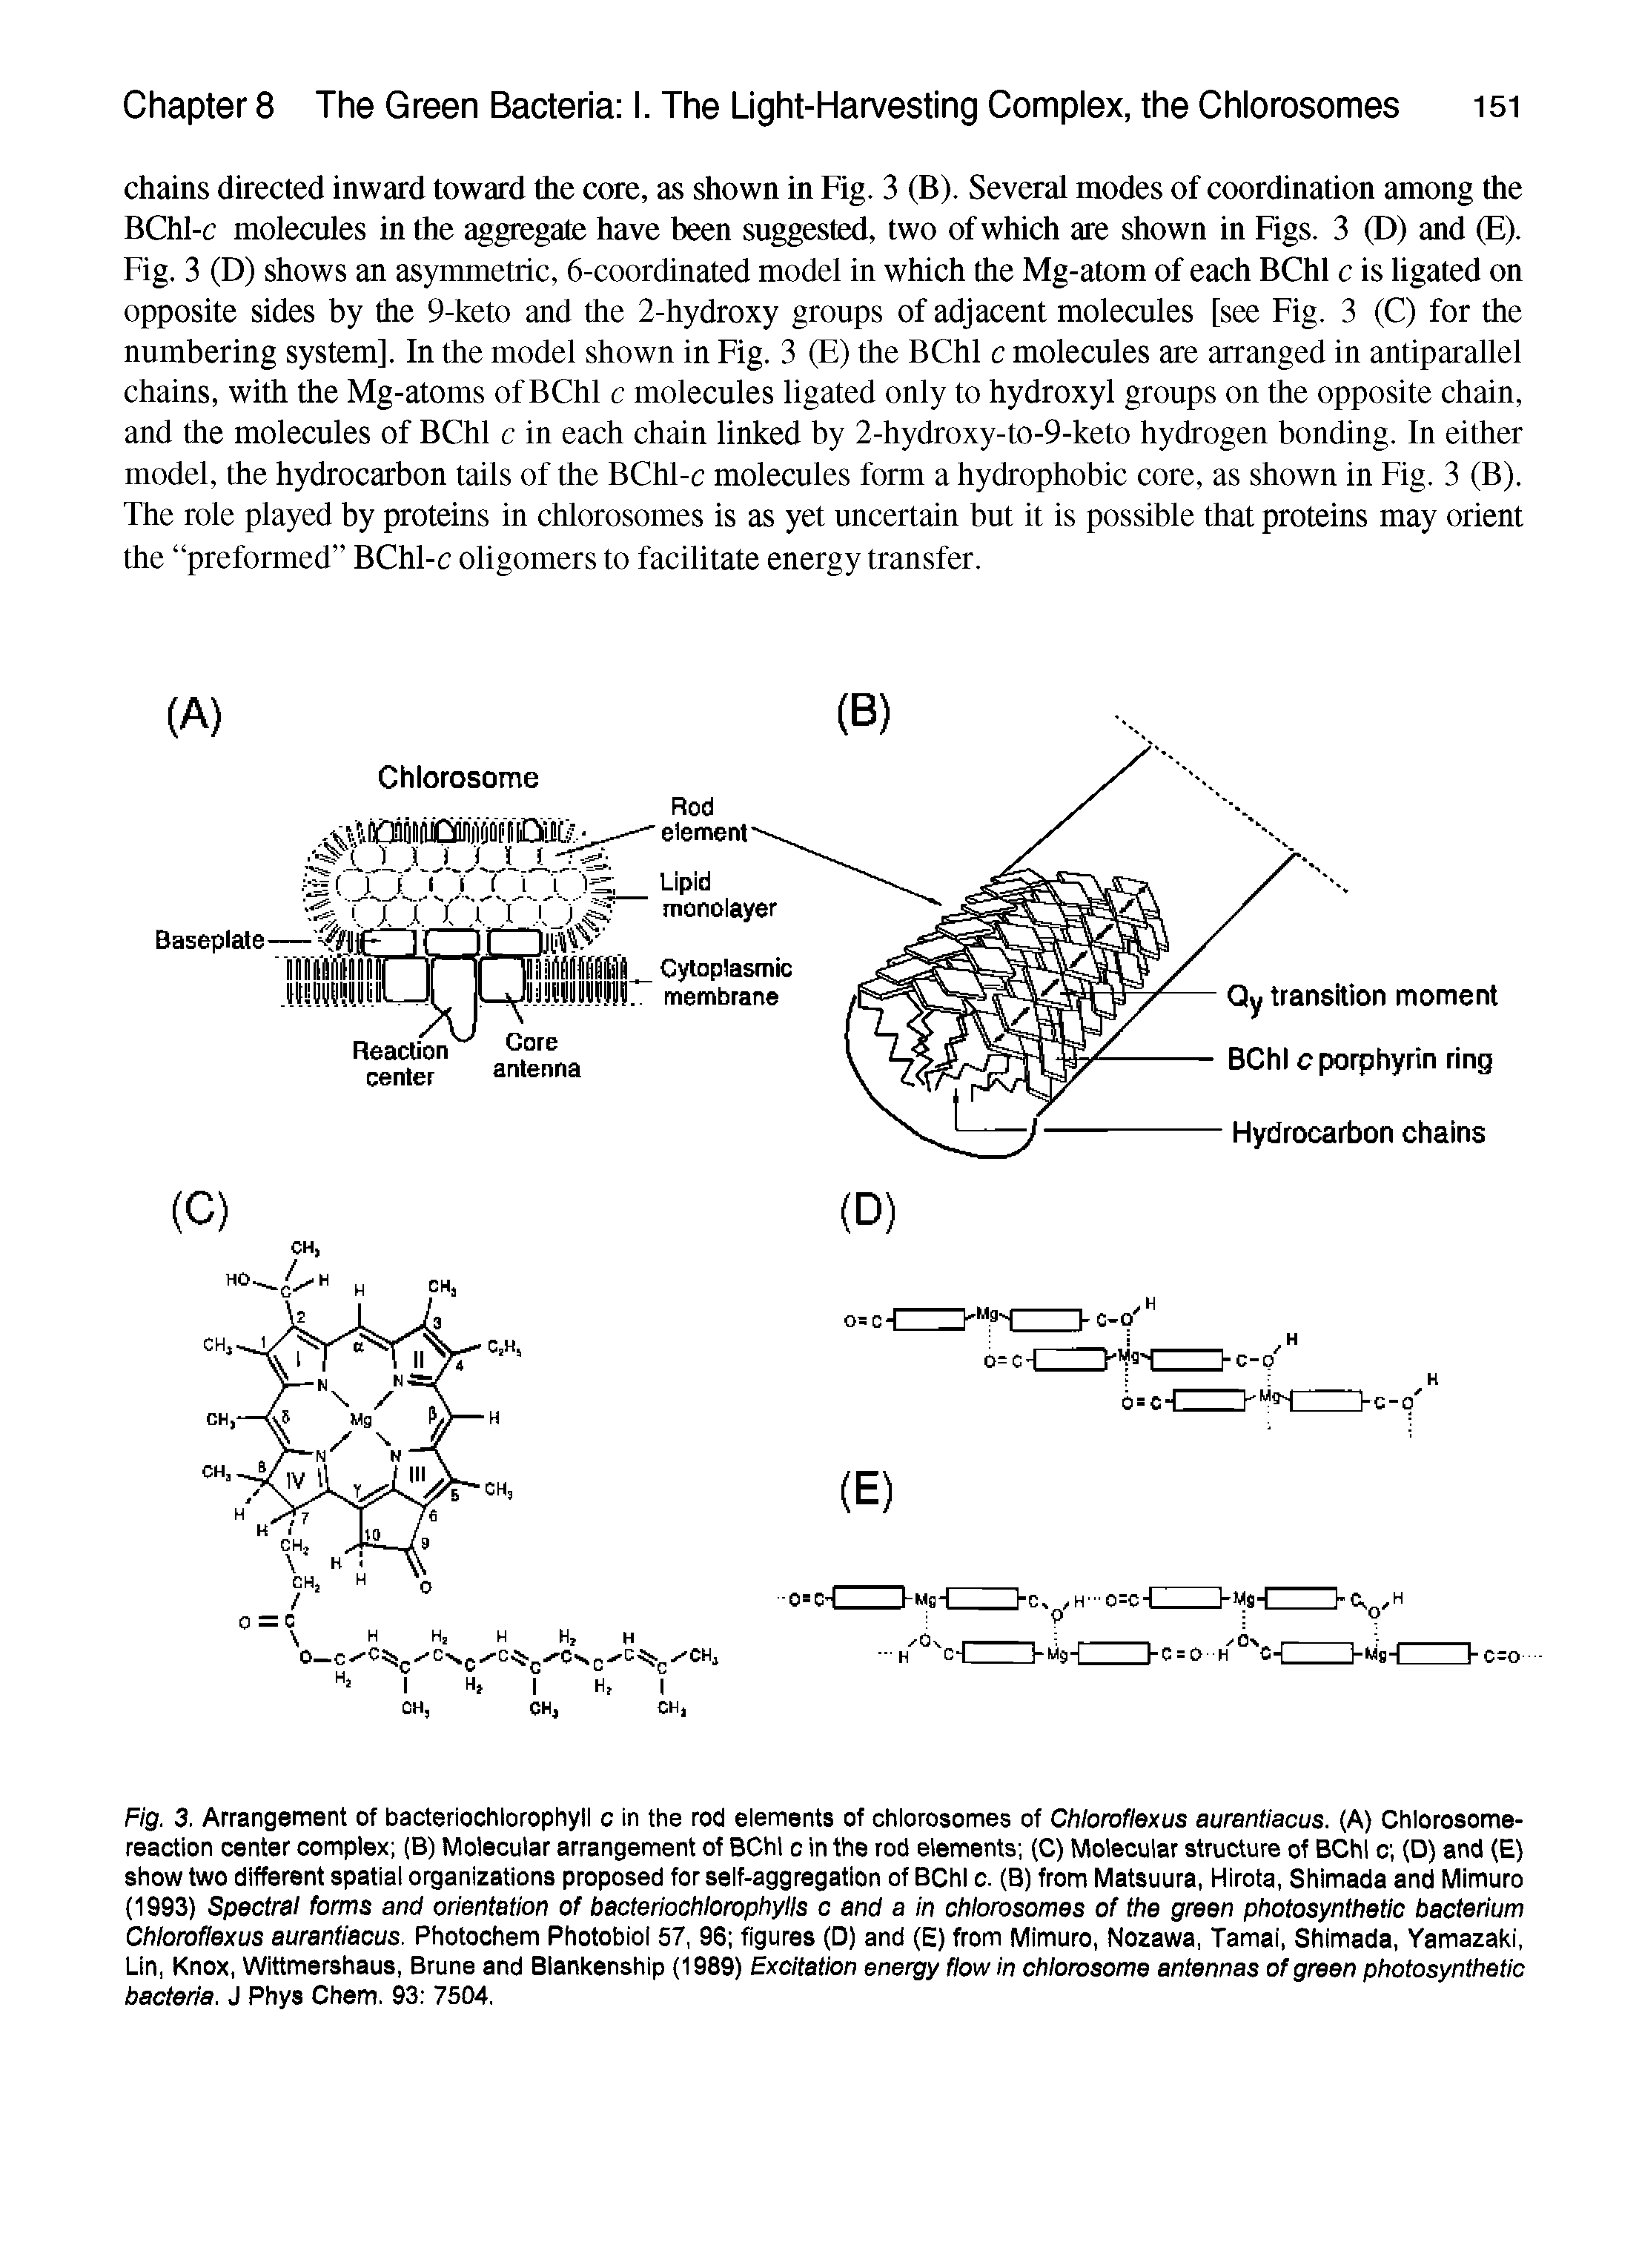 Fig. 3. Arrangement of bacteriochlorophyll c in the rod elements of chlorosomes of Chloroflexus aurantiacus. (A) Chlorosome-reaction center complex (B) Molecular arrangement of BChl c in the rod elements (C) Molecular structure of BChl c (D) and (E) show two different spatial organizations proposed for self-aggregation of BChl c. (B) from Matsuura, Hirota, Shimada and Mimuro (1993) Spectral forms and orientation of bacteriochlorophylls c and a in chlorosomes of the green photosynthetic bacterium Chloroflexus aurantiacus. Photochem Photobiol 57, 96 figures (D) and (E) from Mimuro, Nozawa, Tamai, Shimada, Yamazaki, Lin, Knox, Wittmershaus, Brune and Blankenship (1989) Excitation energy flow in chiorosome antennas of green photosynthetic bacteria. J Phys Chem. 93 7504.